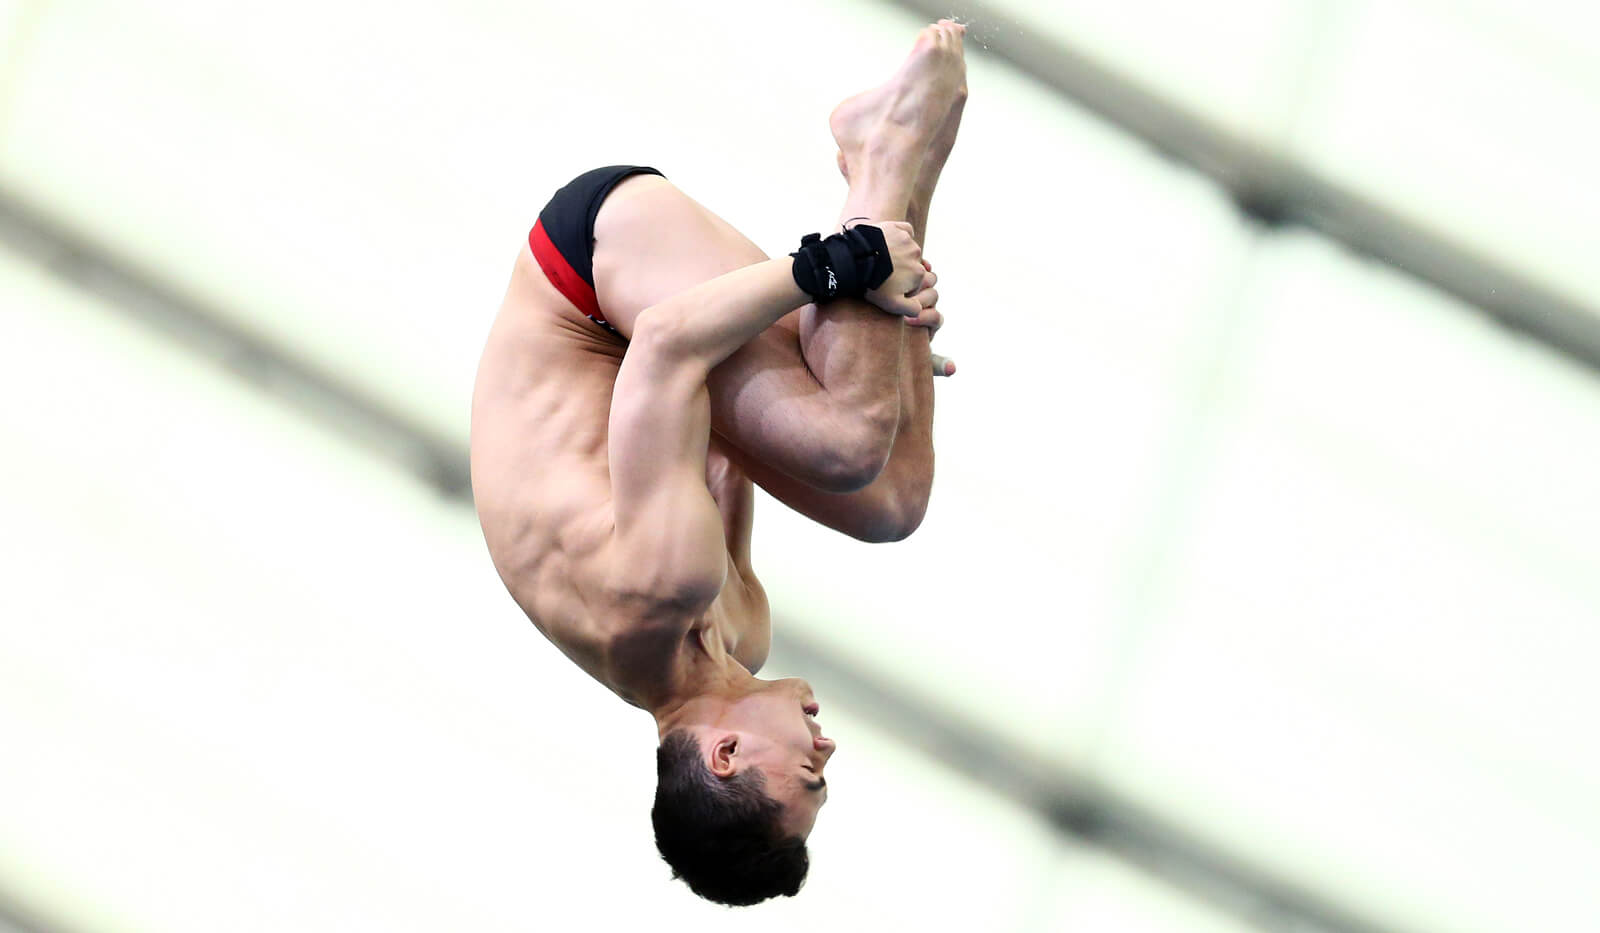 Ethan Pitman reaches final for sixth at diving Grand Prix